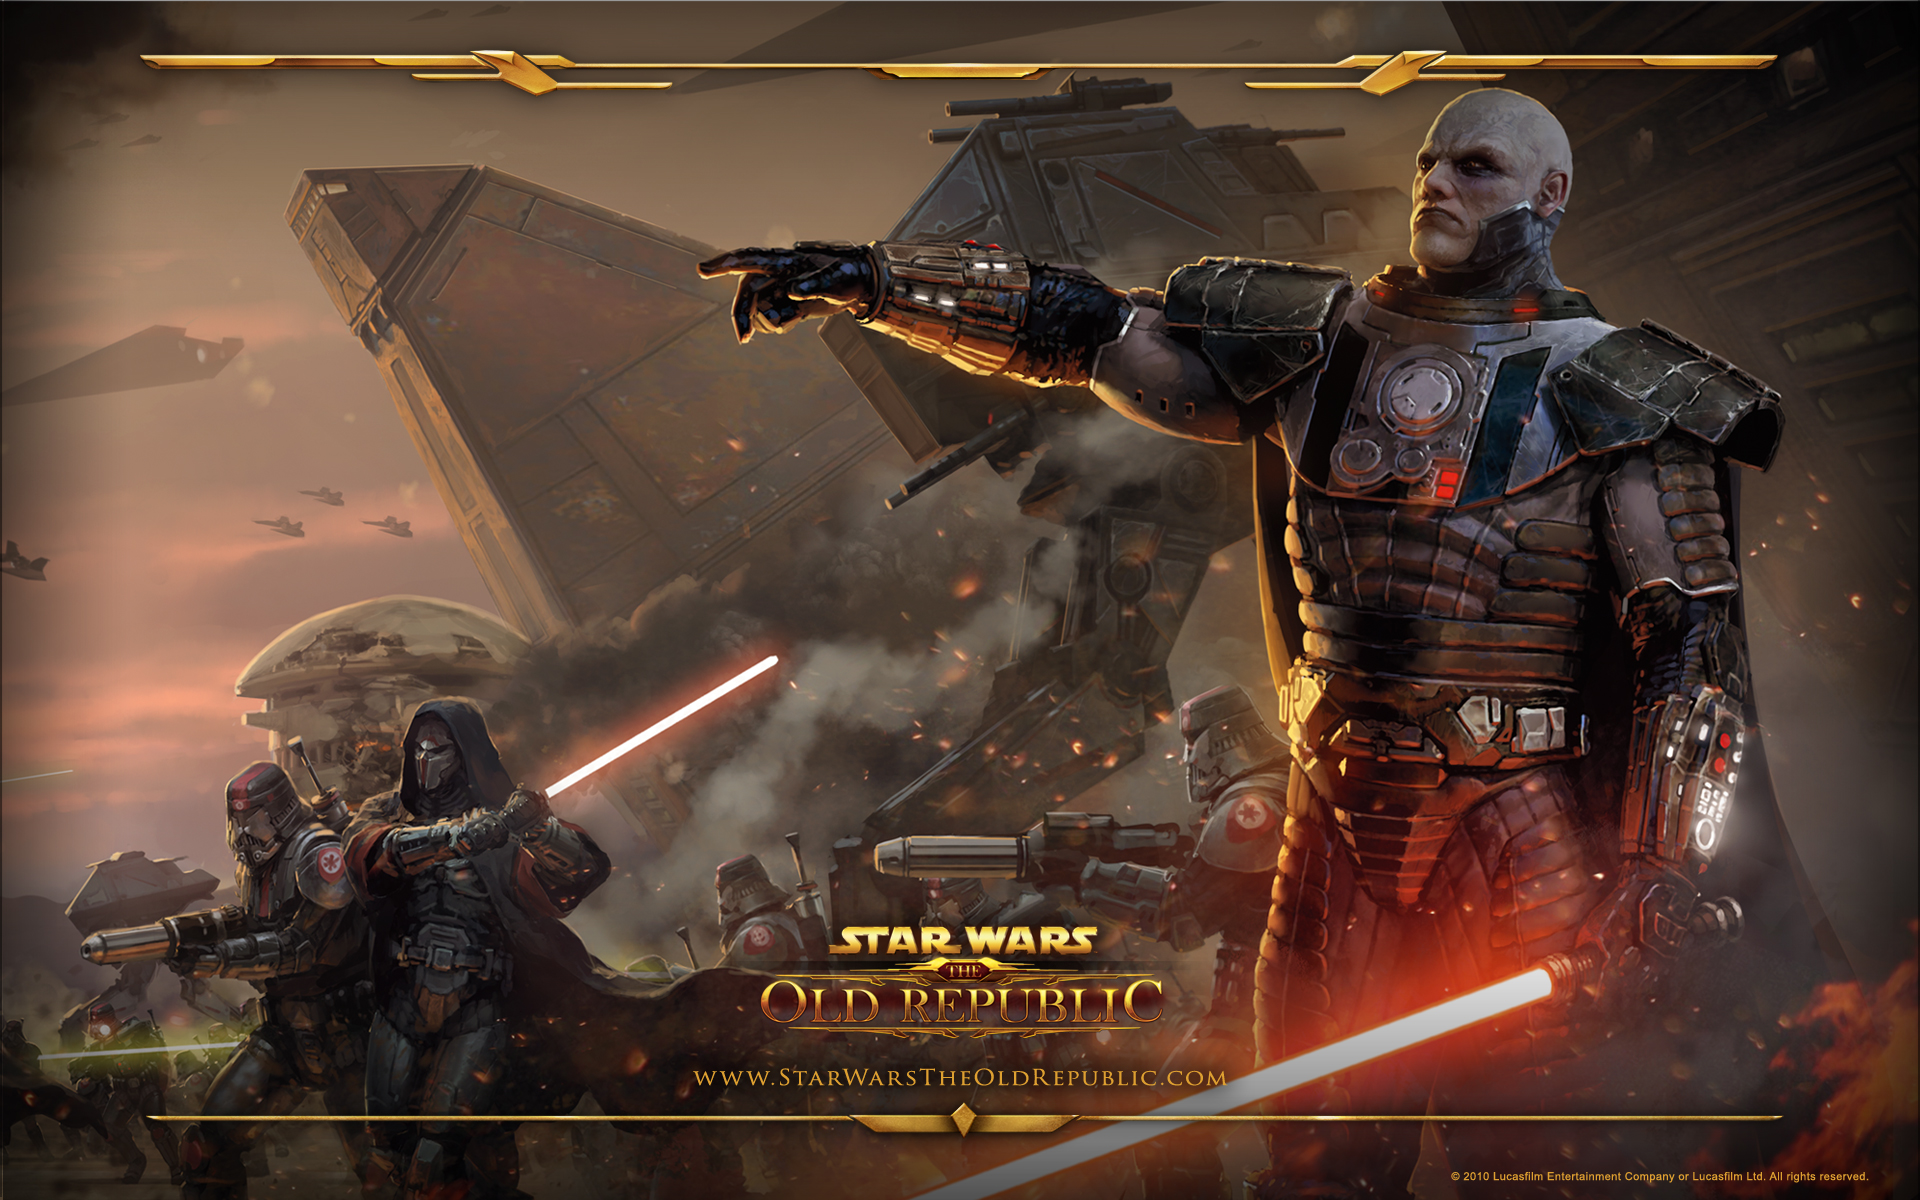 video game, star wars: the old republic, bald, darth malgus, lightsaber, red lightsaber, sith (star wars), star wars, weapon